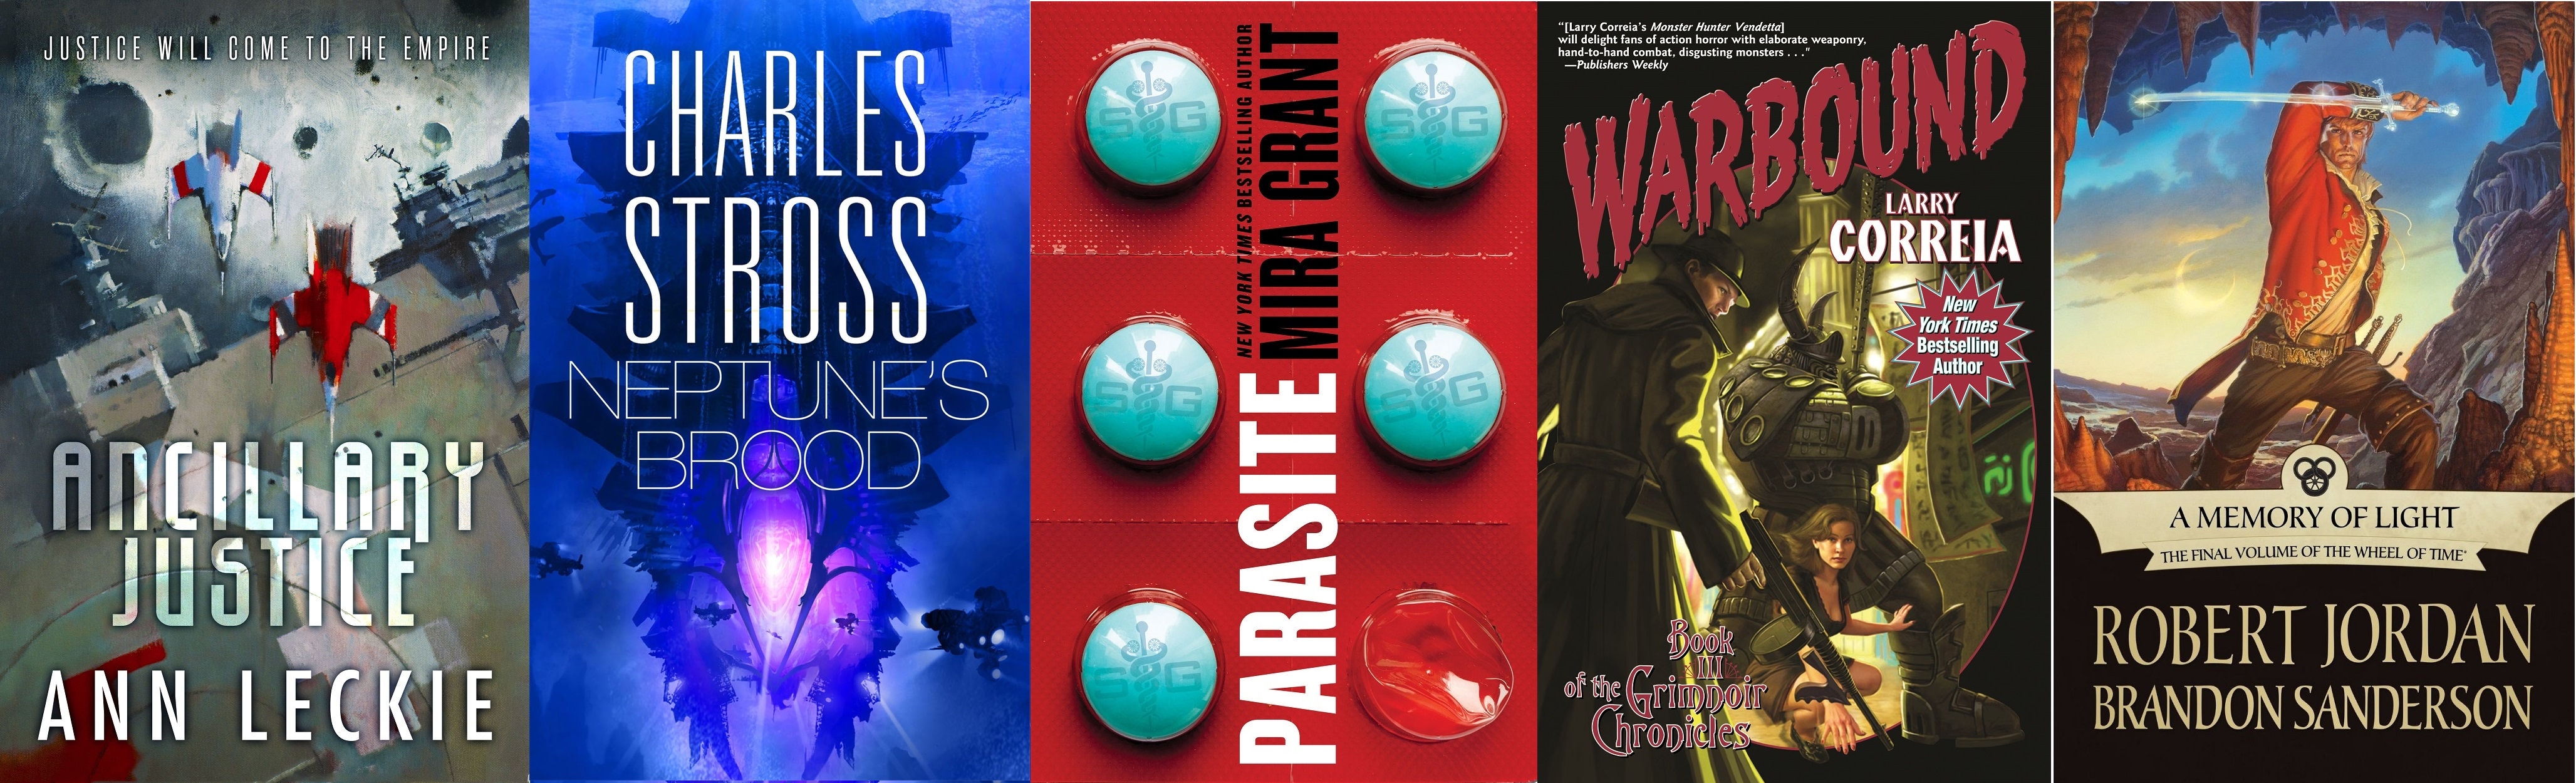 2014 Hugo Awards Finalists - From left to right; Ancillary Justice by Ann Leckie, Neptune’s Brood by Charles Stross, Parasite by Mira Grant, Warbound, Book III of the Grimnoir Chronicles by Larry Correia and The Wheel of Time (A Memory of Light) by Robert Jordan and Brandon Sanderson